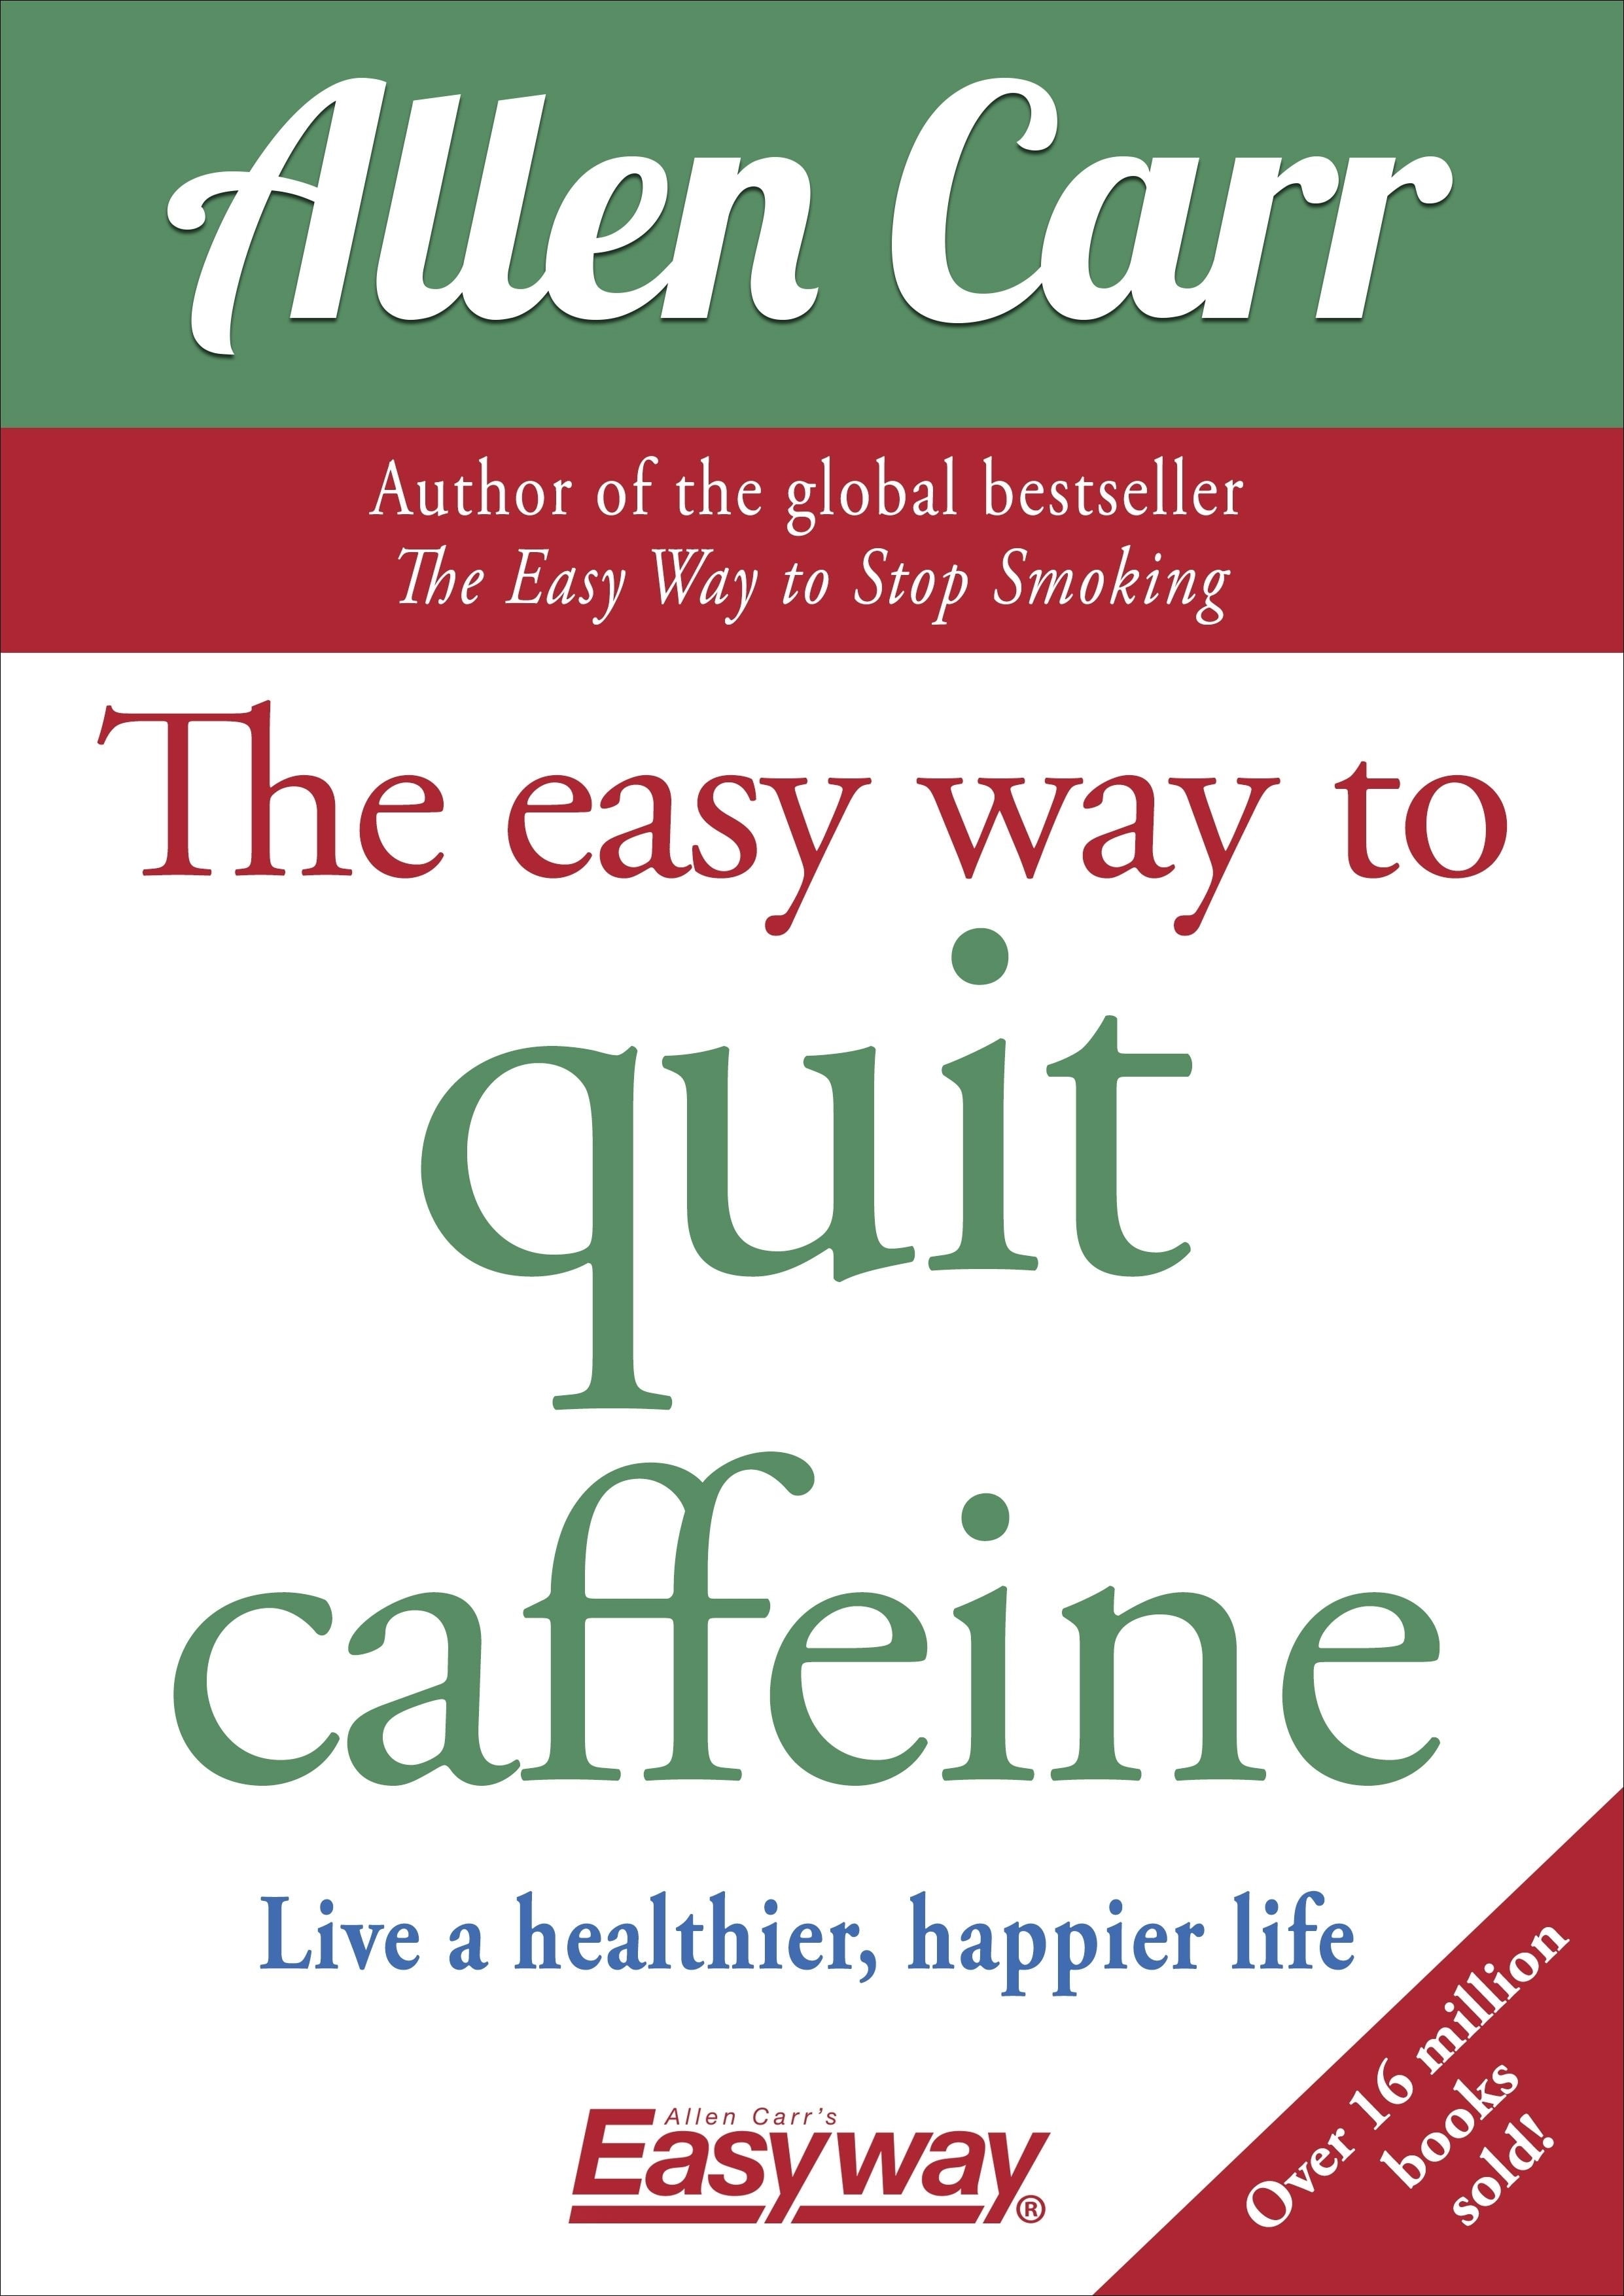 allen carr easy way to quit drinking